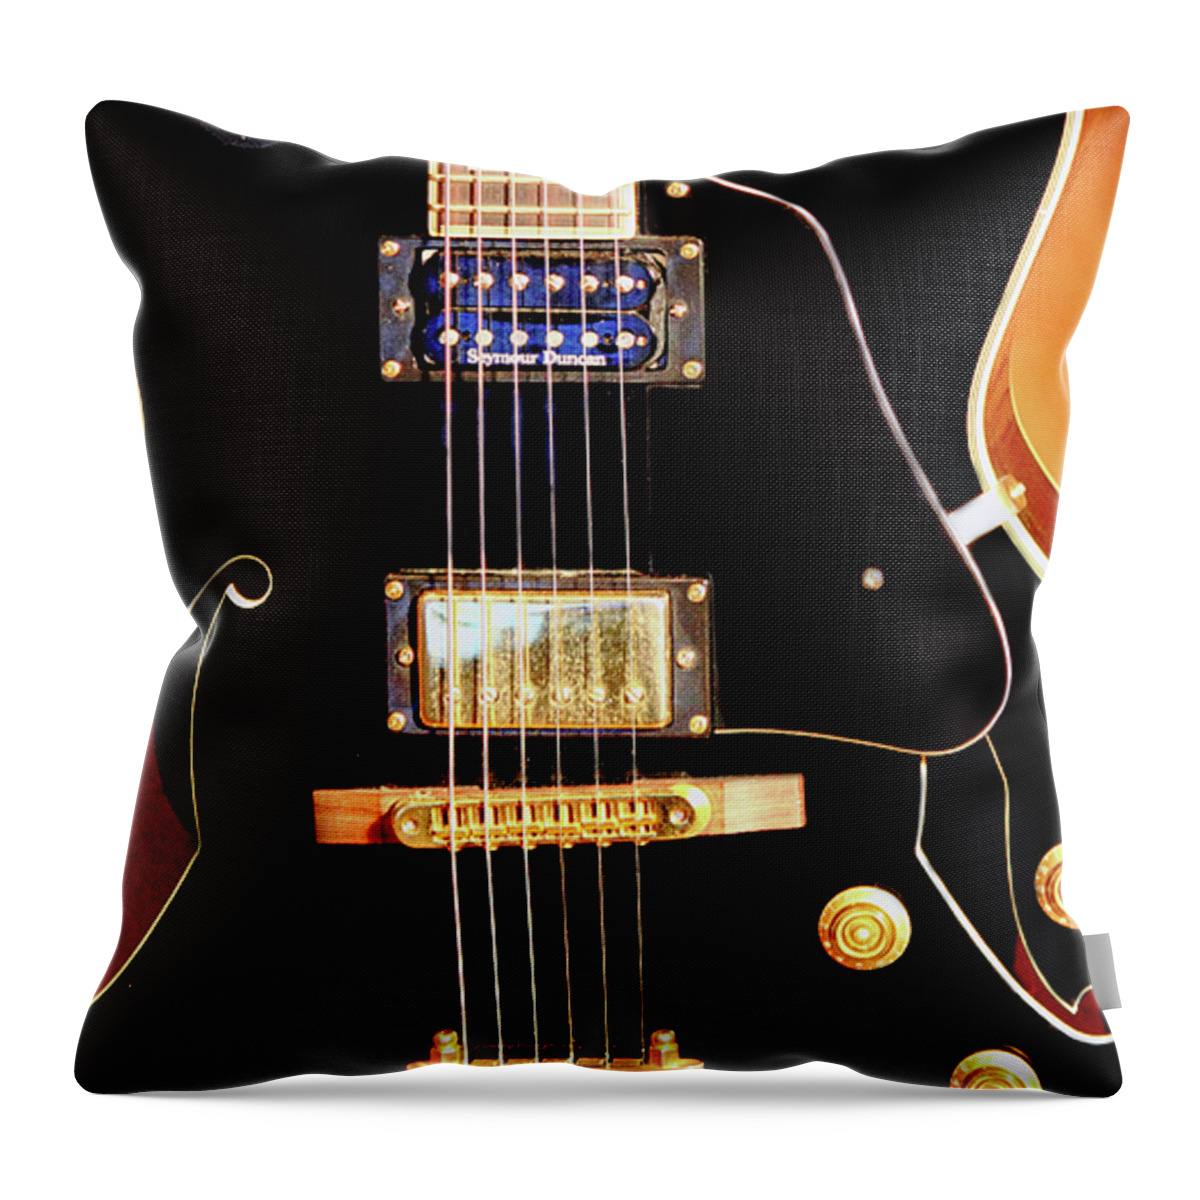 Guitar Throw Pillow featuring the photograph Play Them Blues by Barry Jones